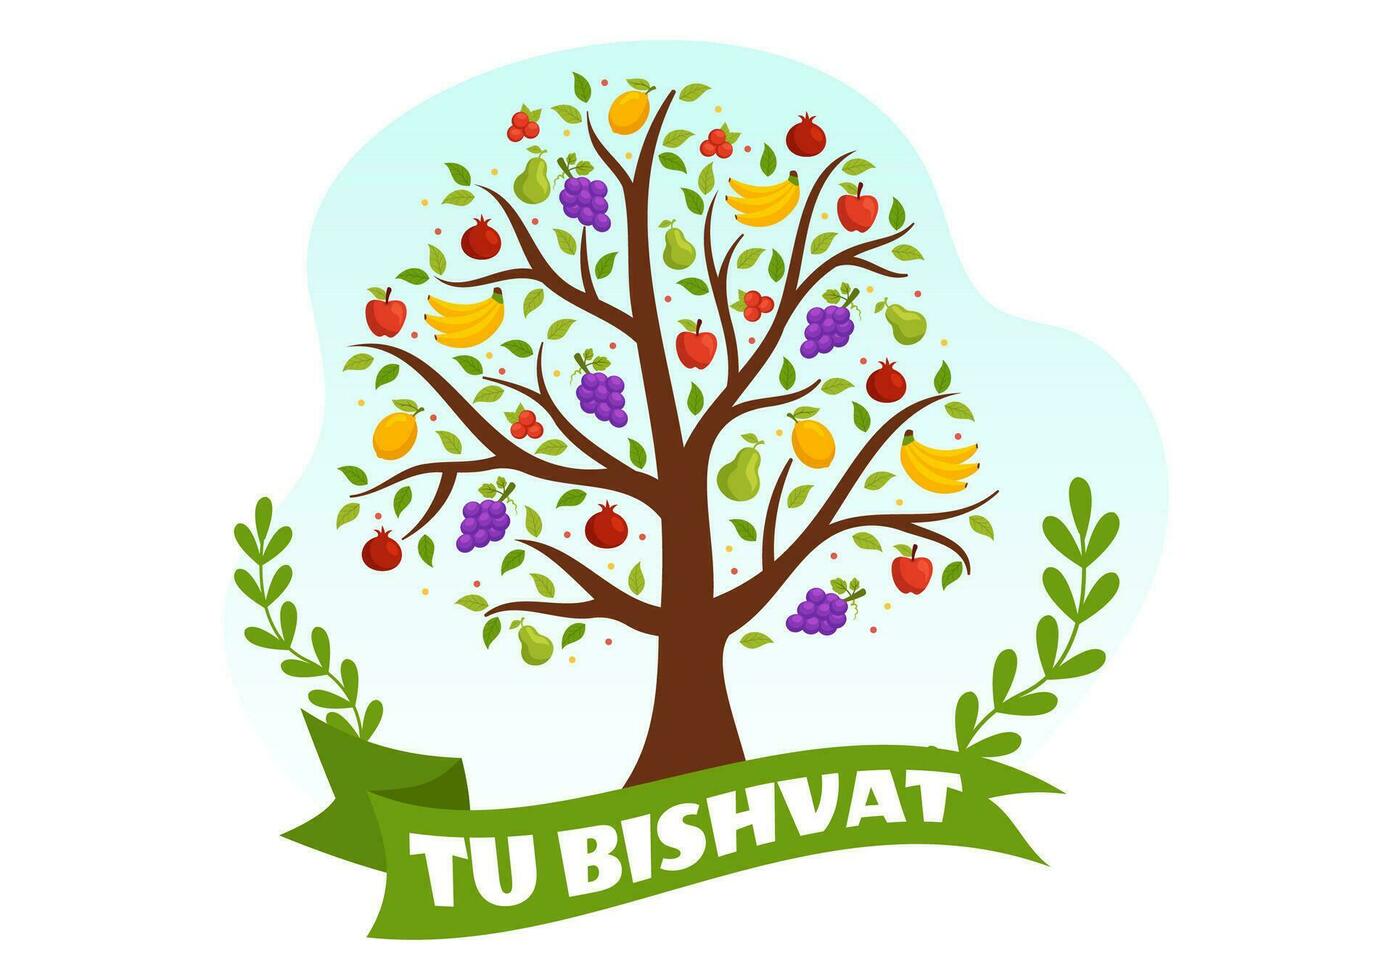 Happy Tu Bishvat Vector Illustration. Translation the Jewish New Year for Trees. Kids Planted a Tree in the Yard in Flat Cartoon Background Design